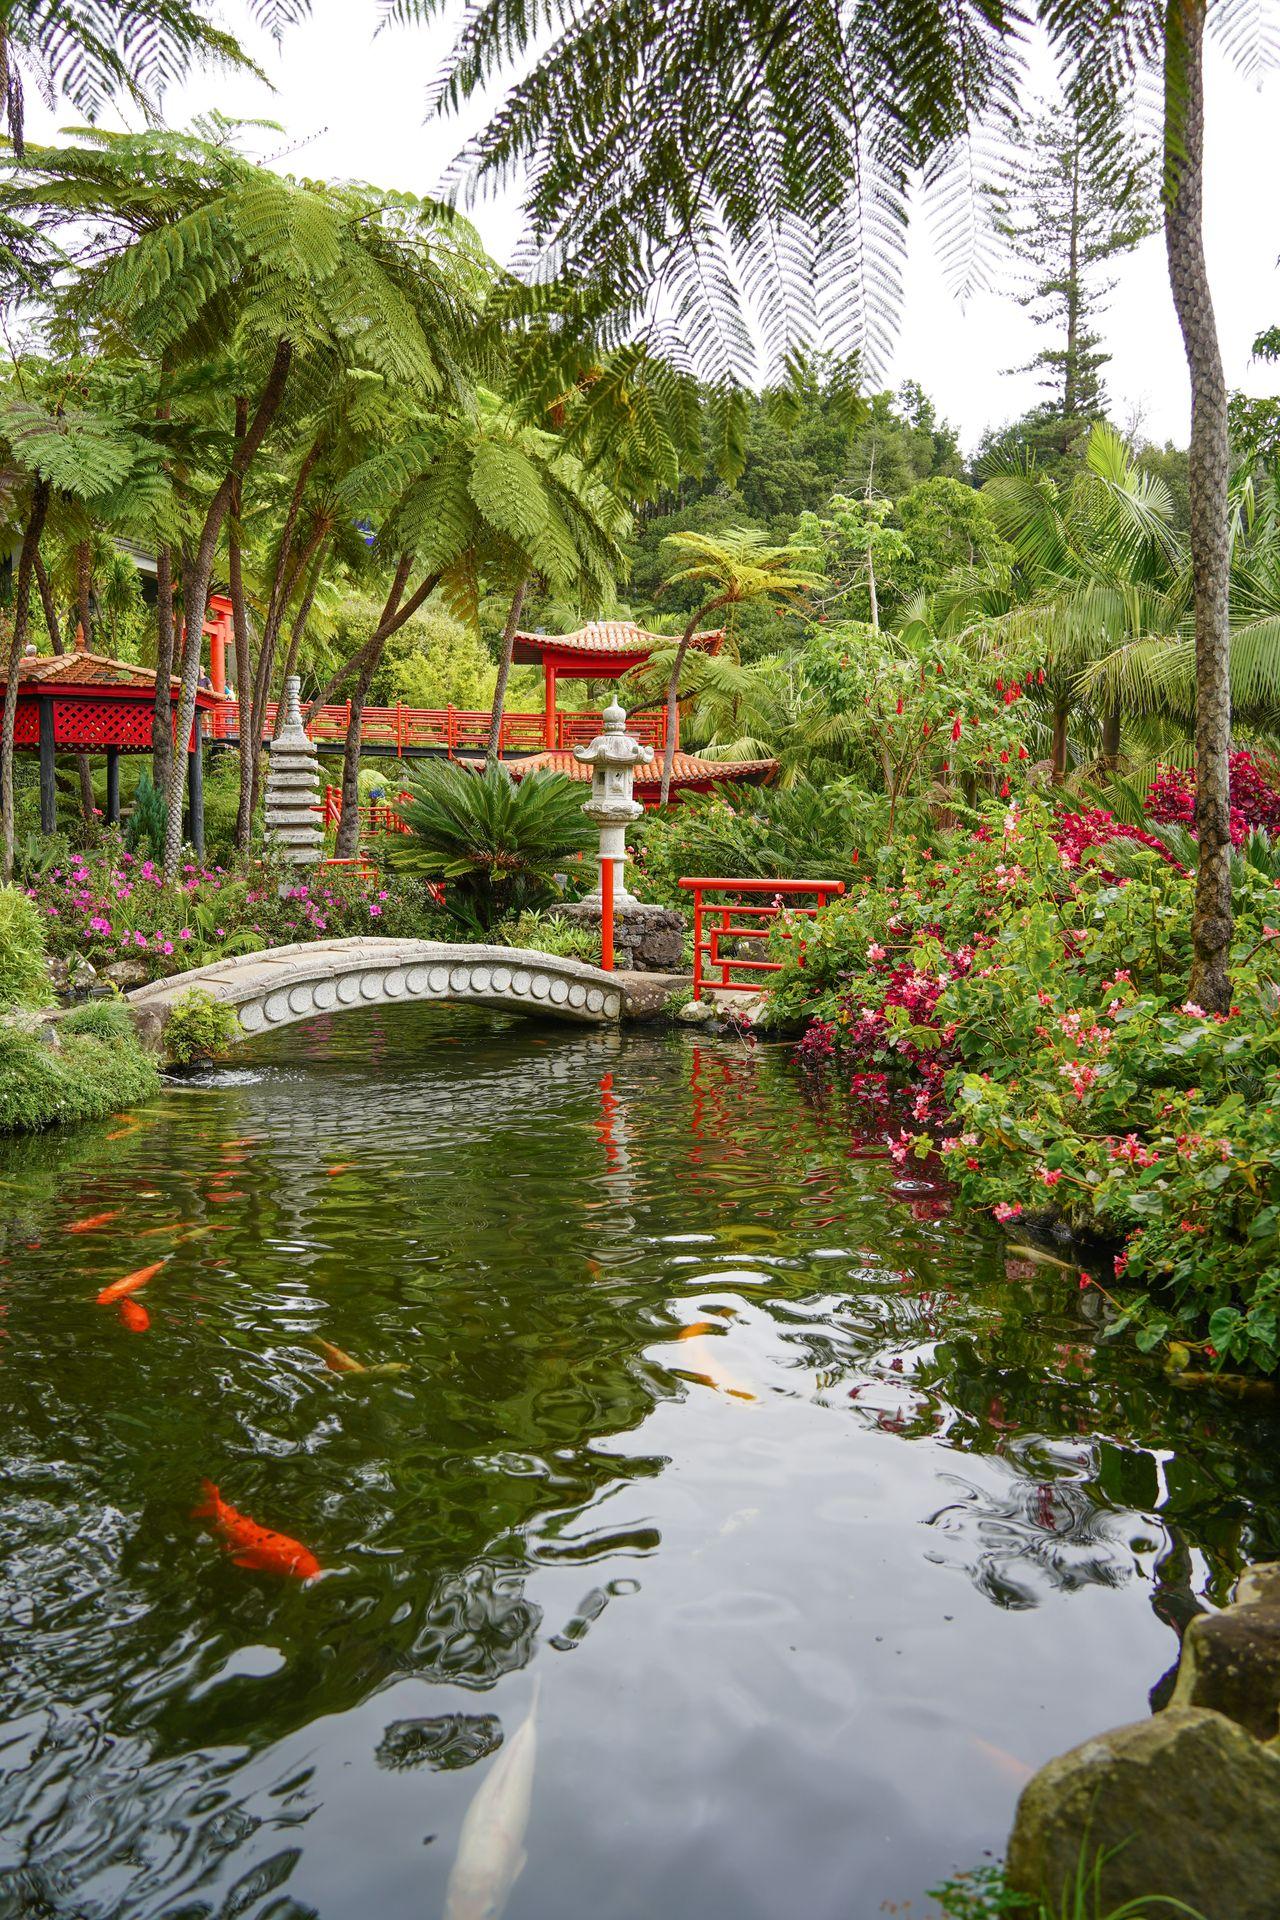 A pond with koi fish and Japanese architecture in the Monte Palace Gardens